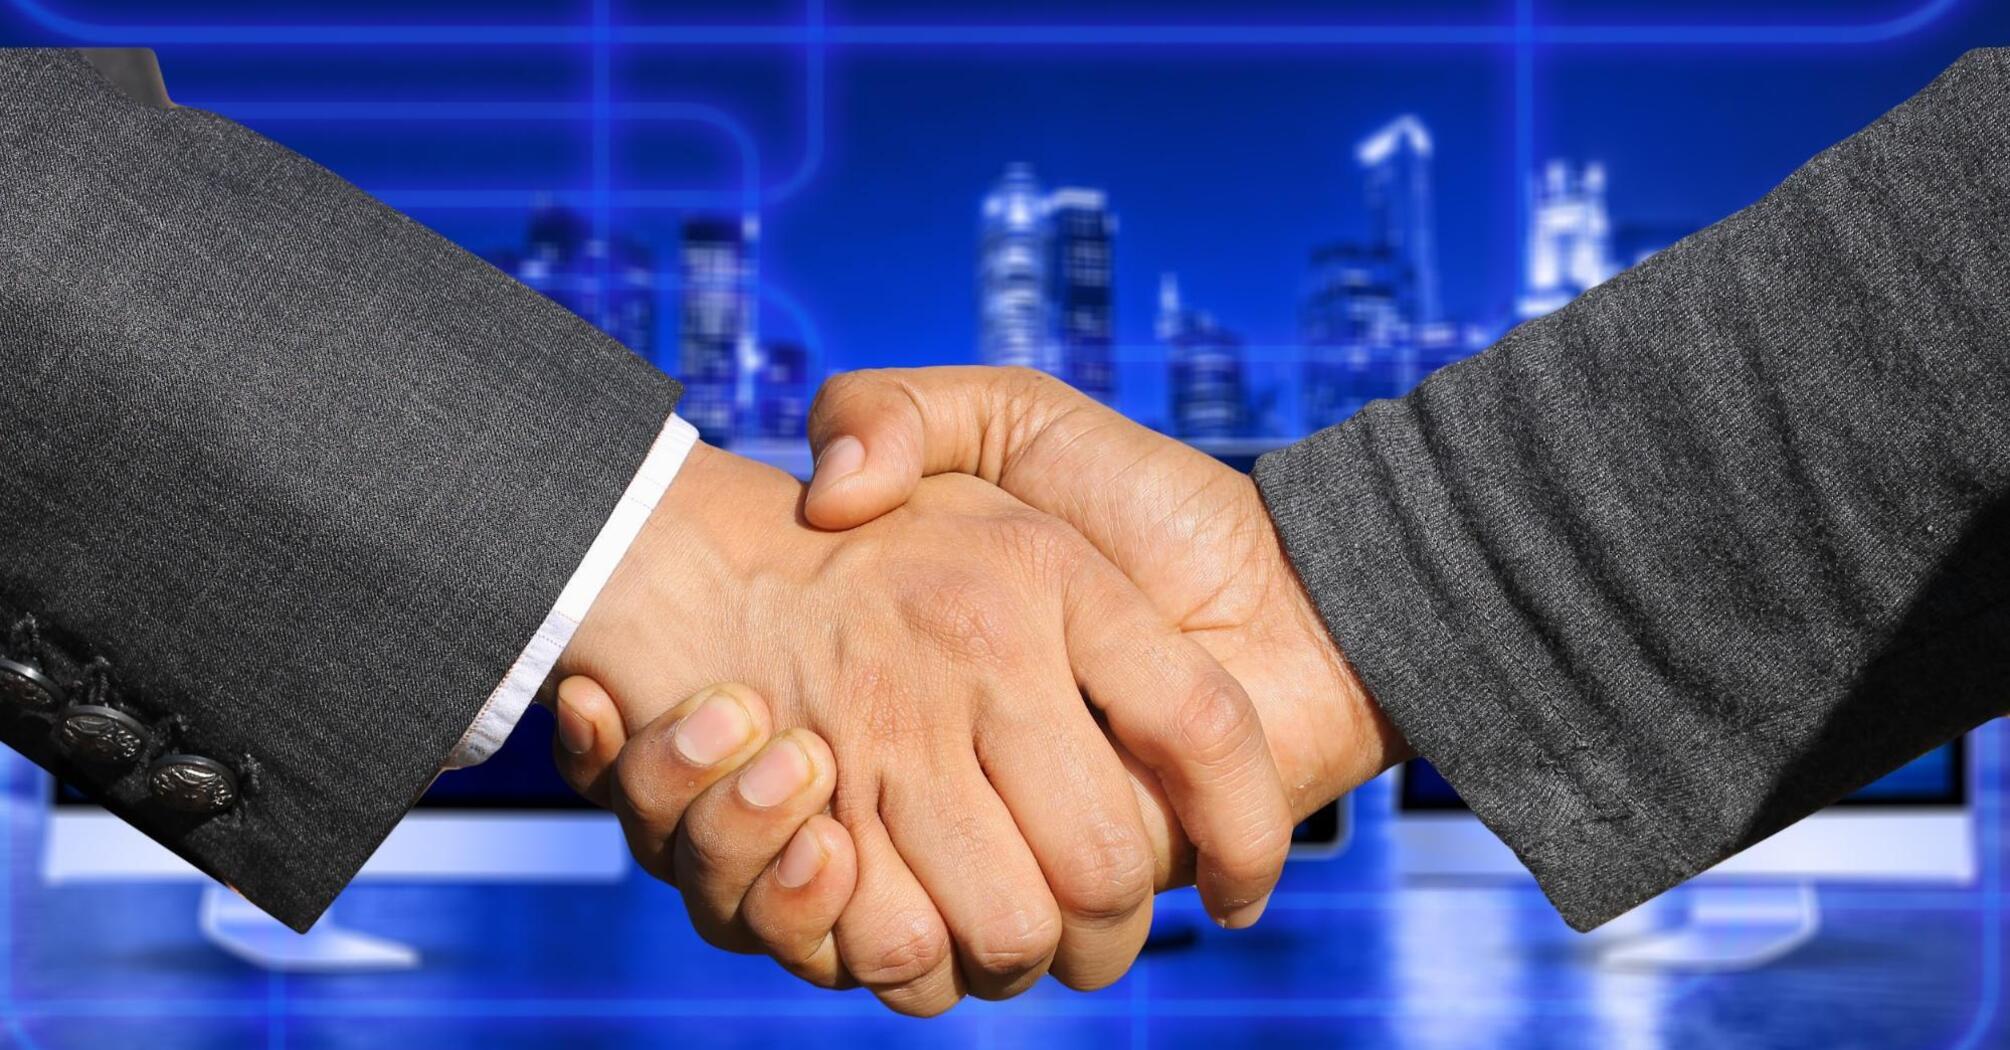 Shaking hands of two people in suits